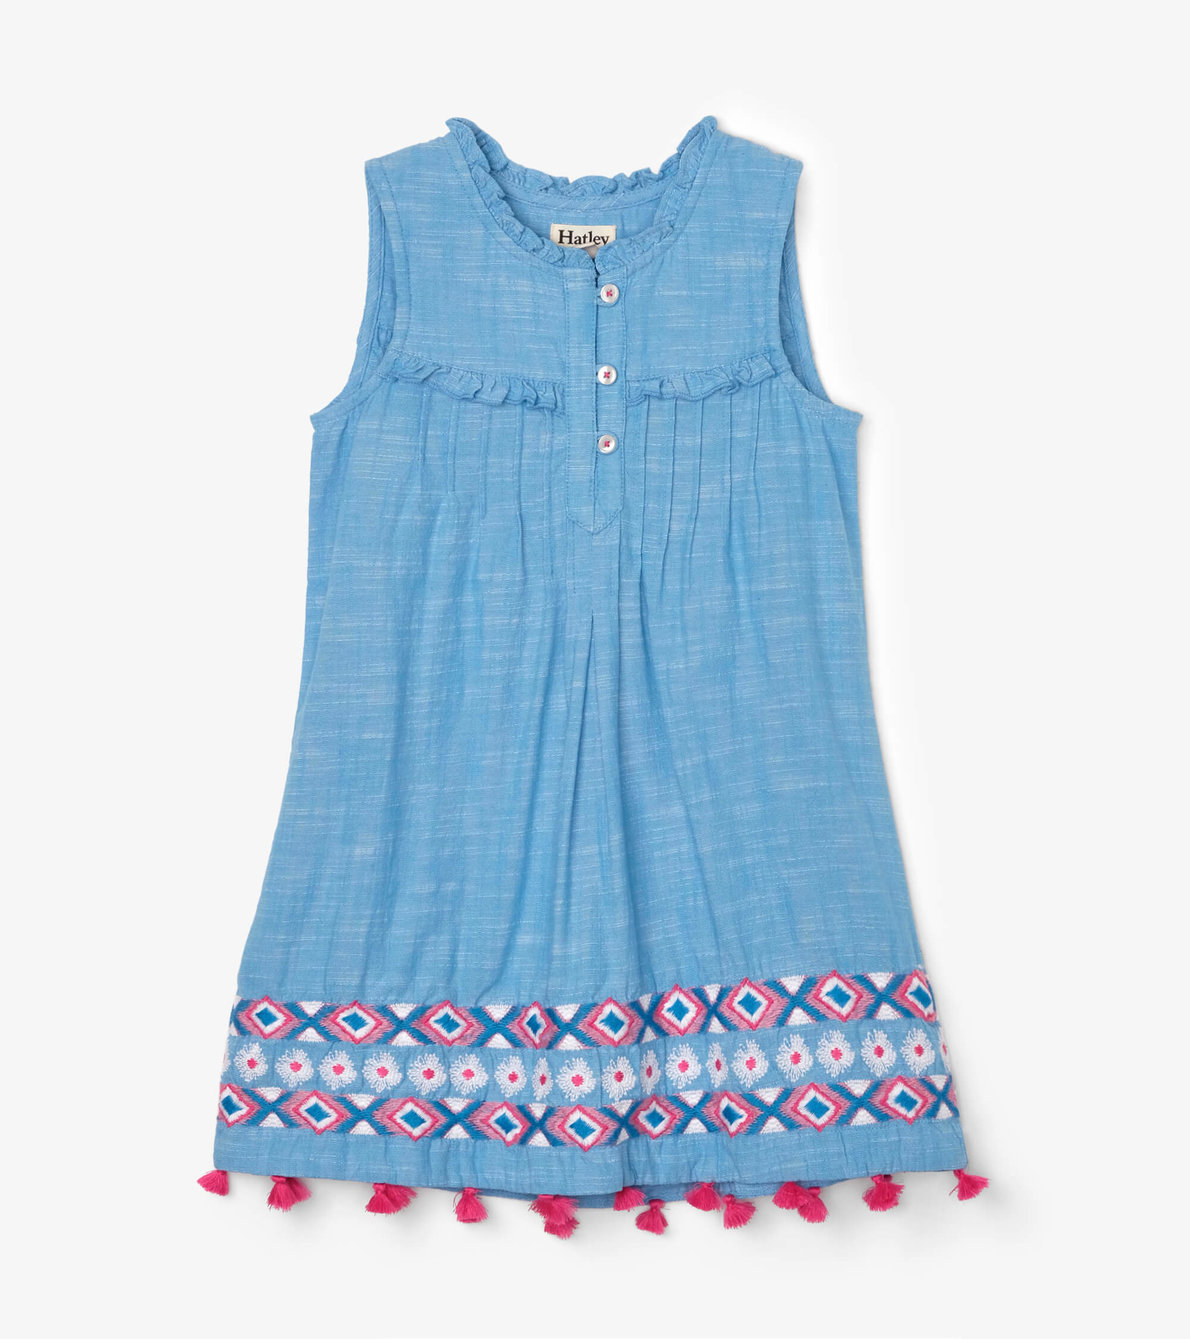 View larger image of Chambray Floral Pin Tuck Dress